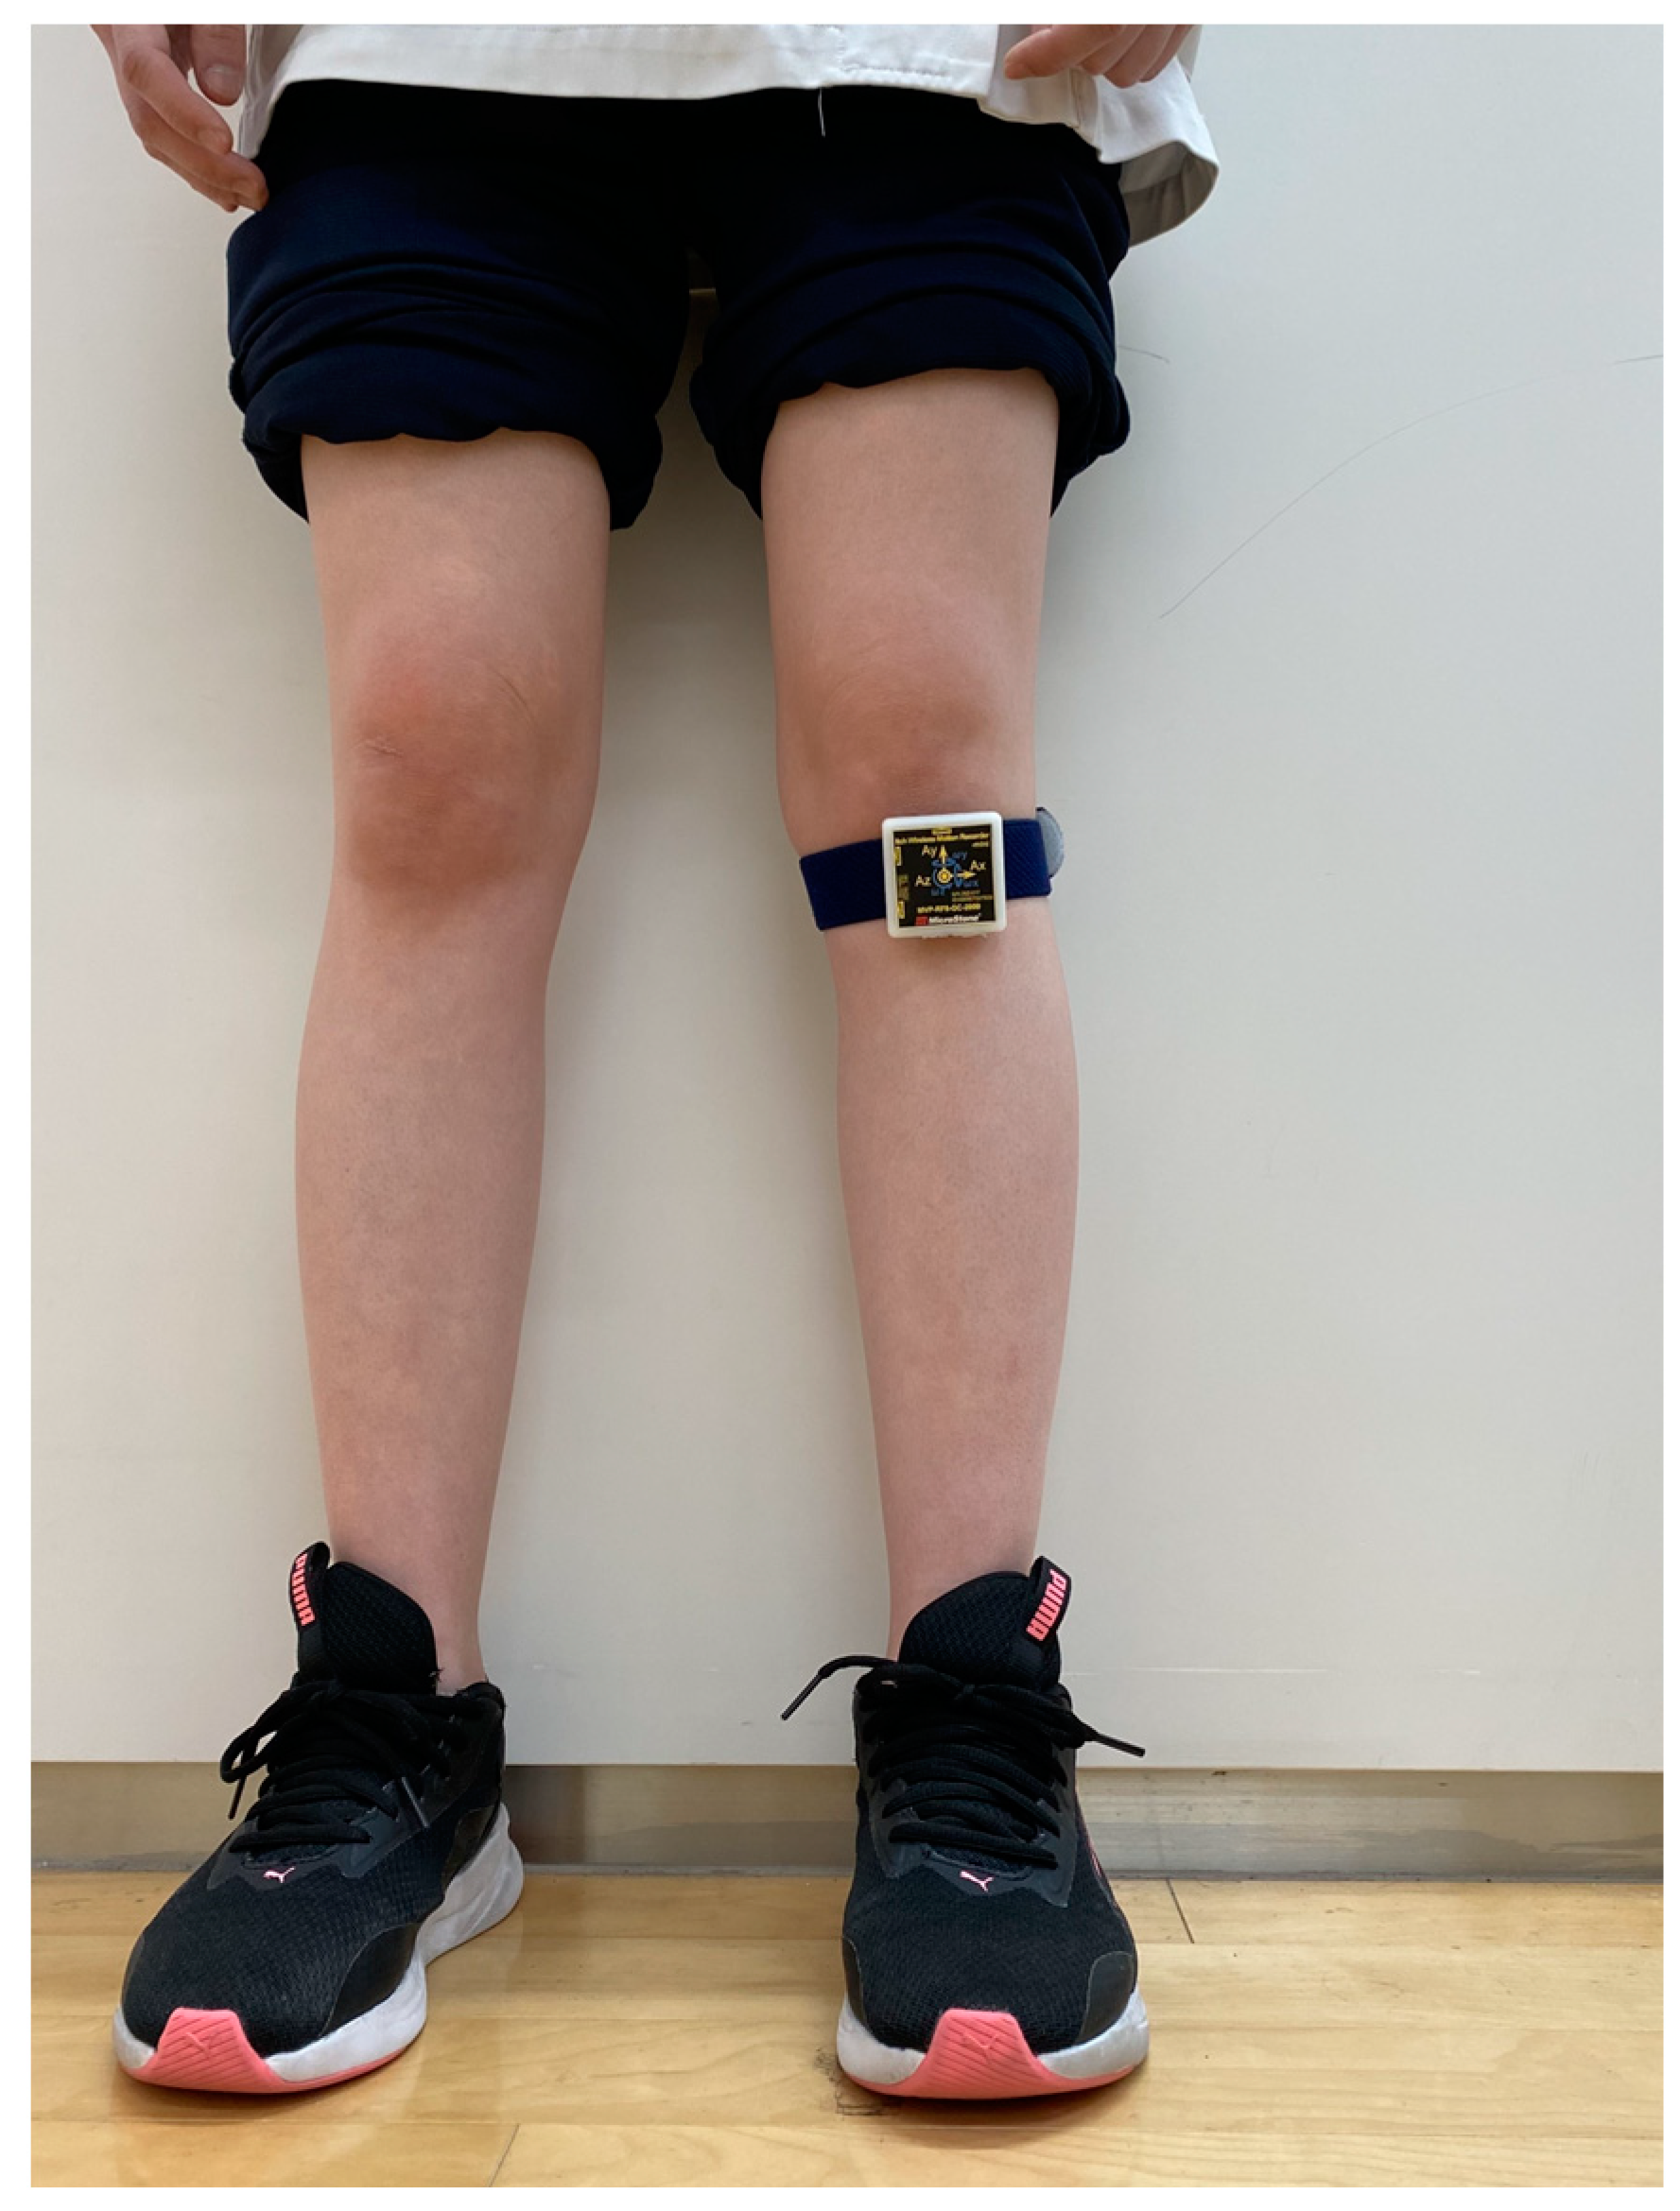 Sensors | Free Full-Text | Association of the Degree of Varus Thrust during  Gait Assessed by an Inertial Measurement Unit with Patient-Reported Outcome  Measures in Knee Osteoarthritis